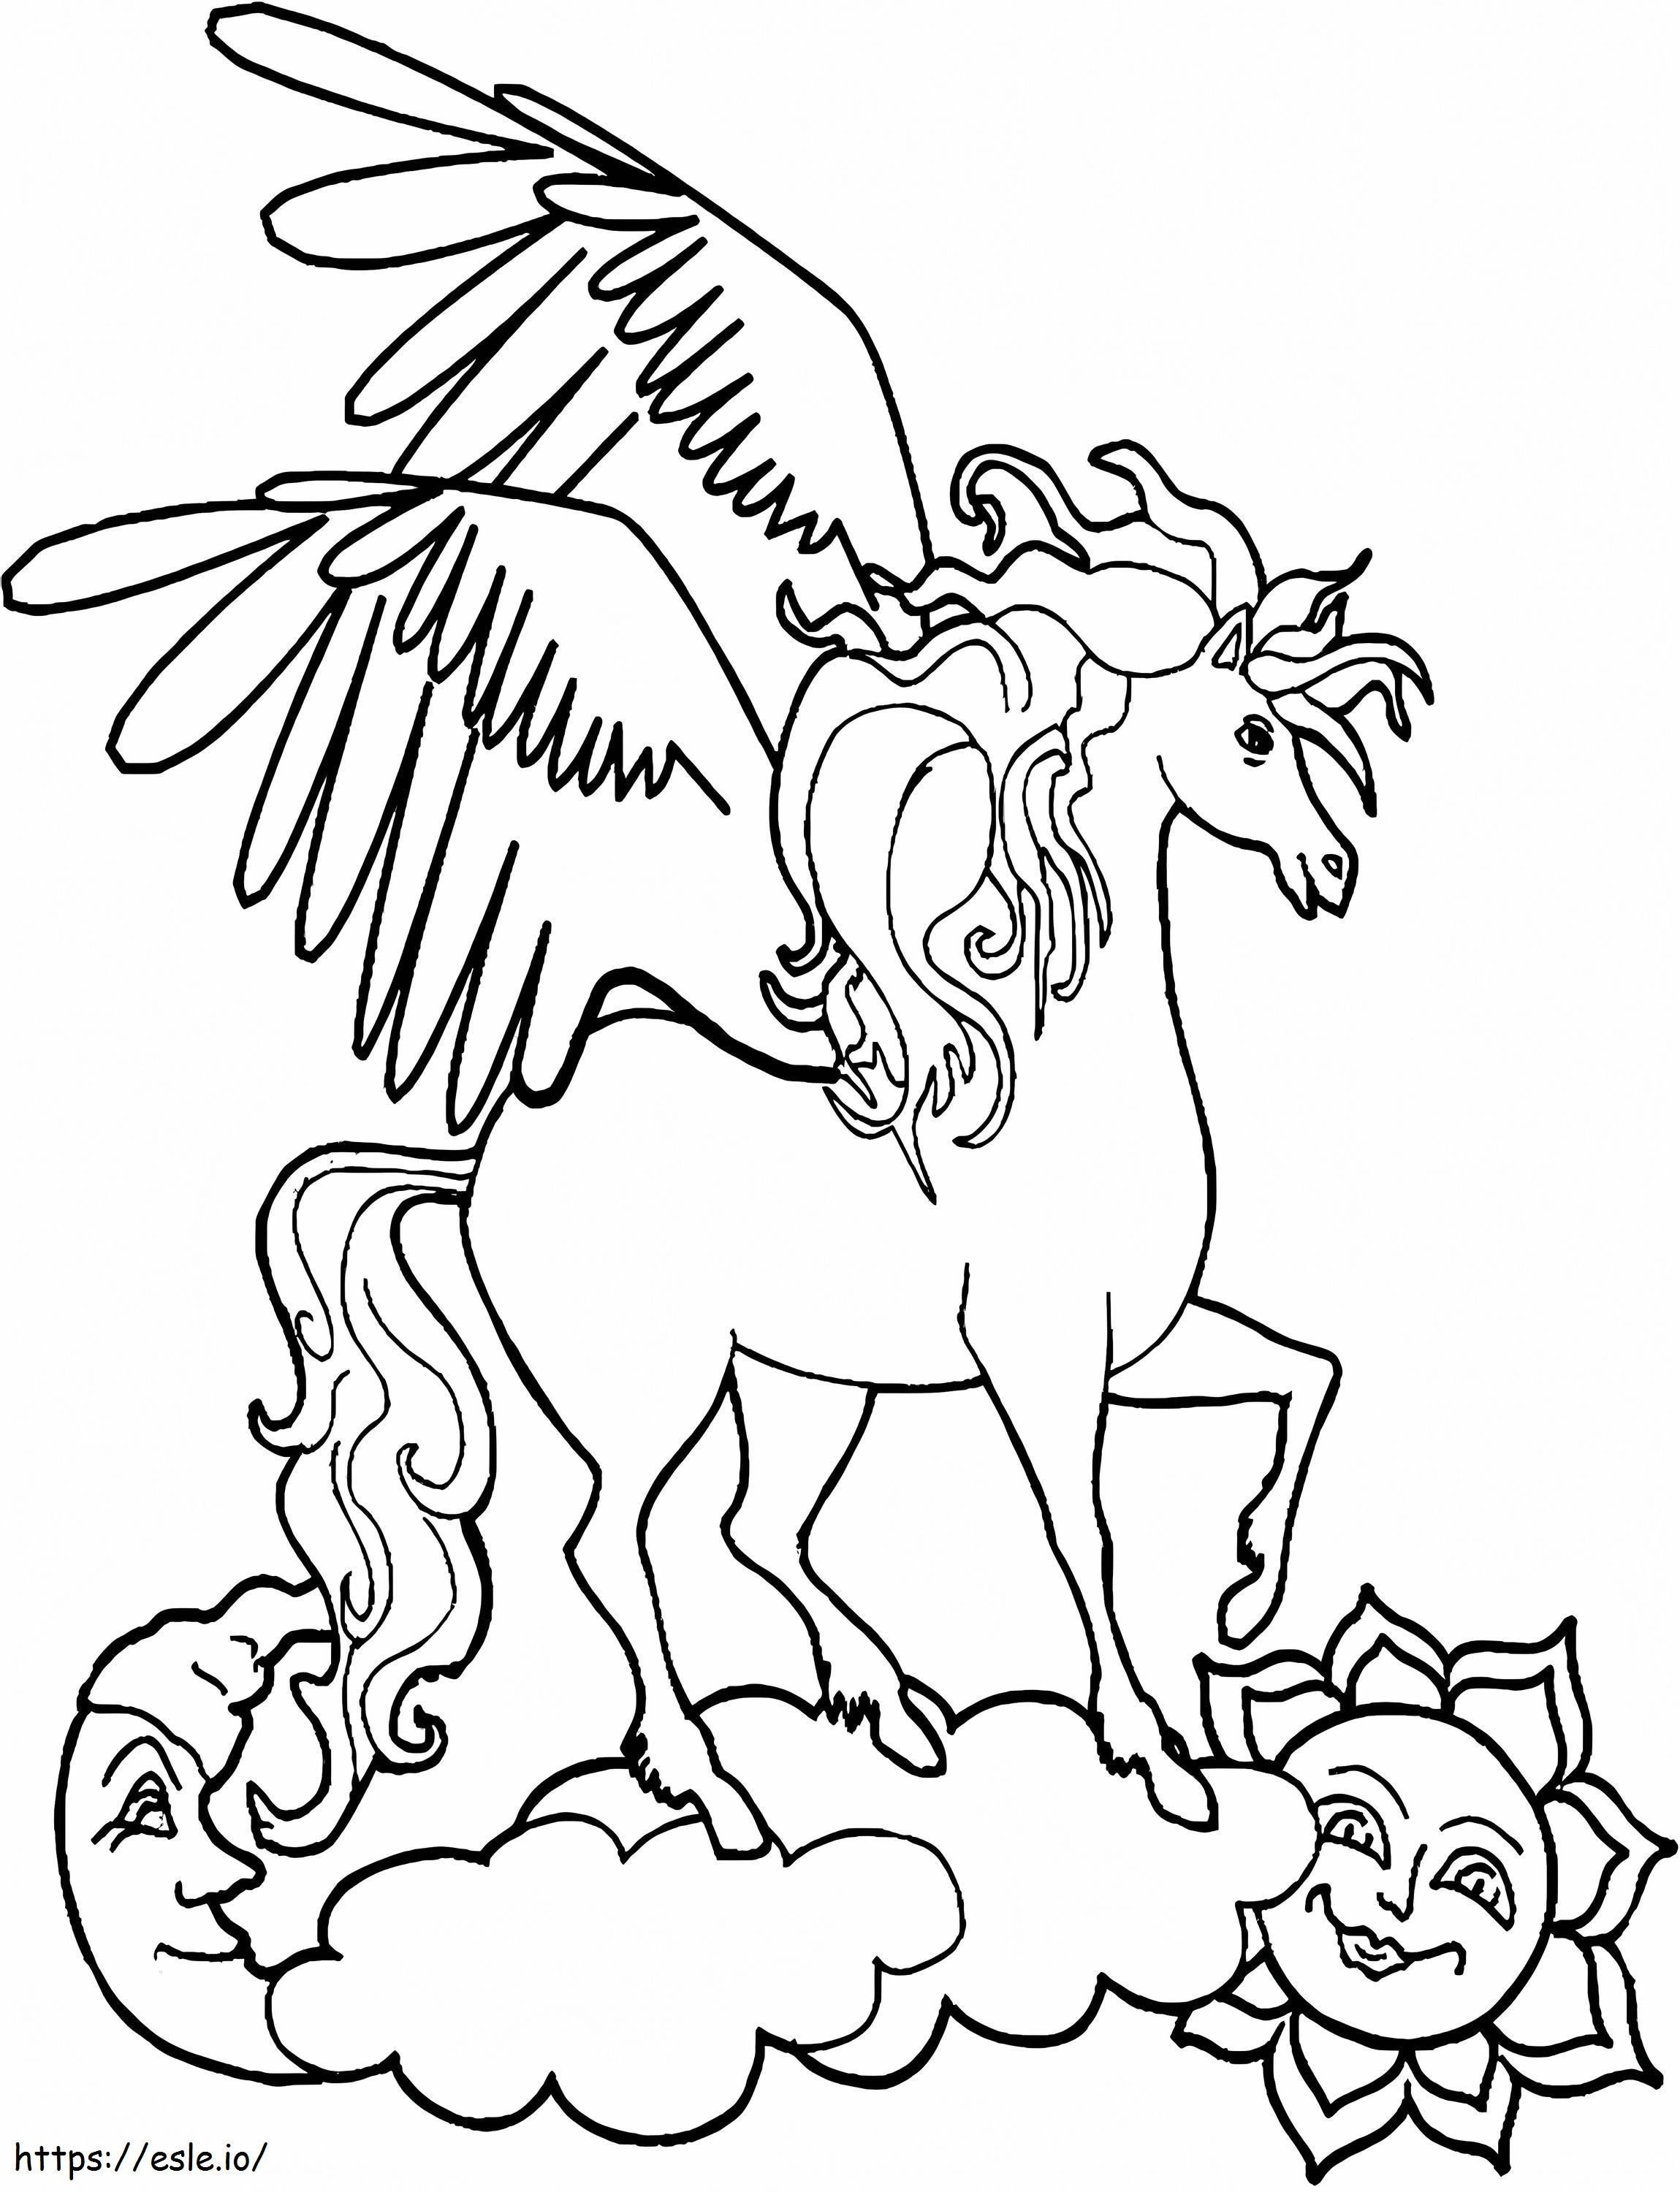 1563930815 Unicorn Standing On Cloud A4 coloring page